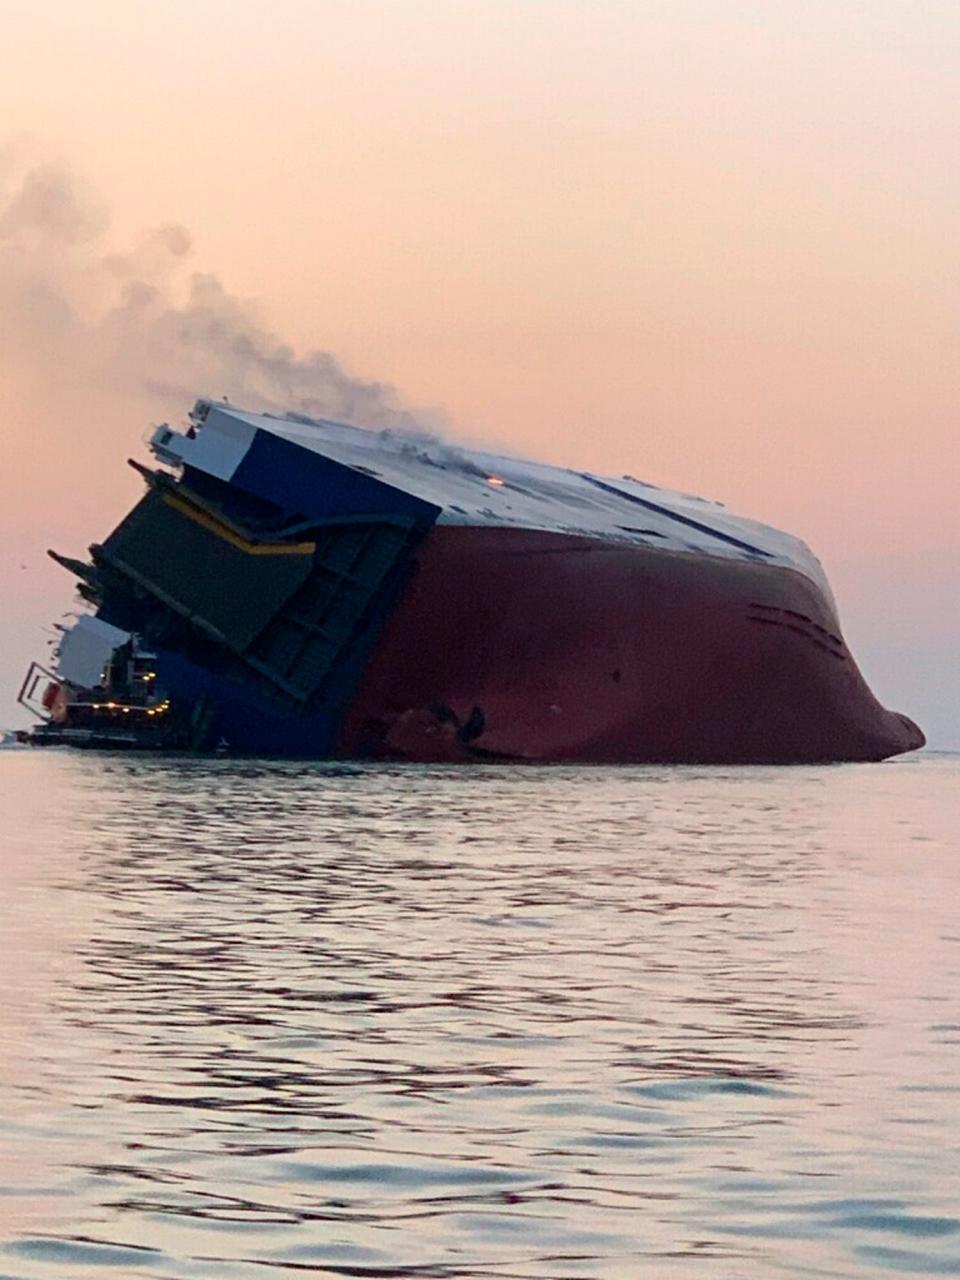 Coast Guard crews and port partners respond to an overturned cargo vessel with a fire on board on Sept. 8, 2019, in St. Simons Sound, Ga.